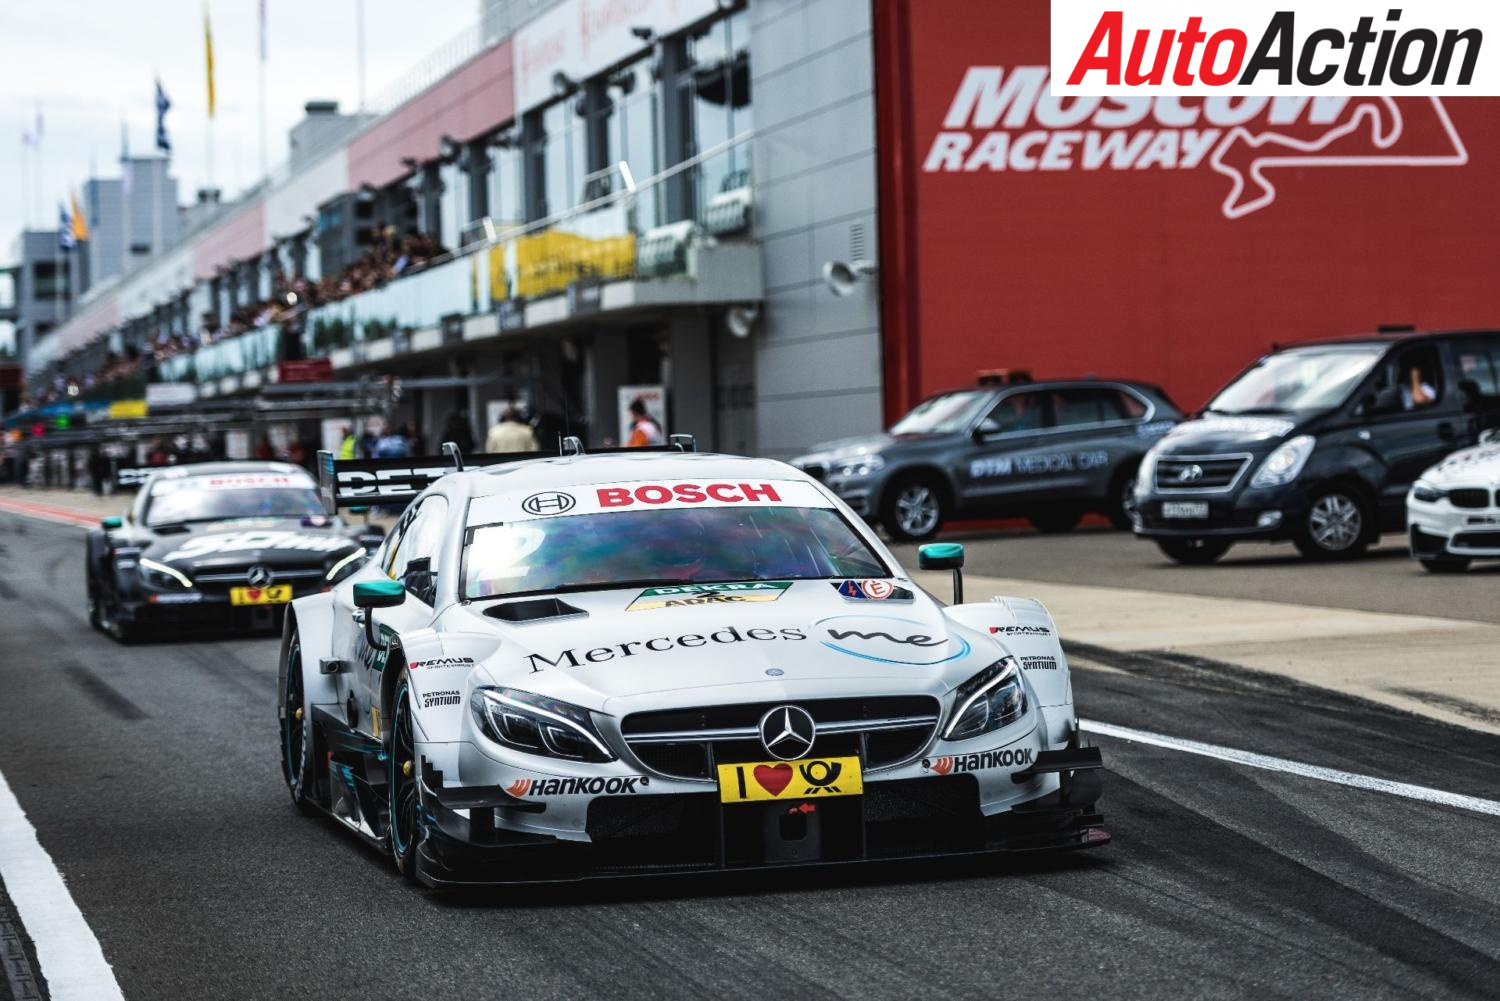 Mercedes-AMG at the last DTM round in Moscow - Photo: LAT